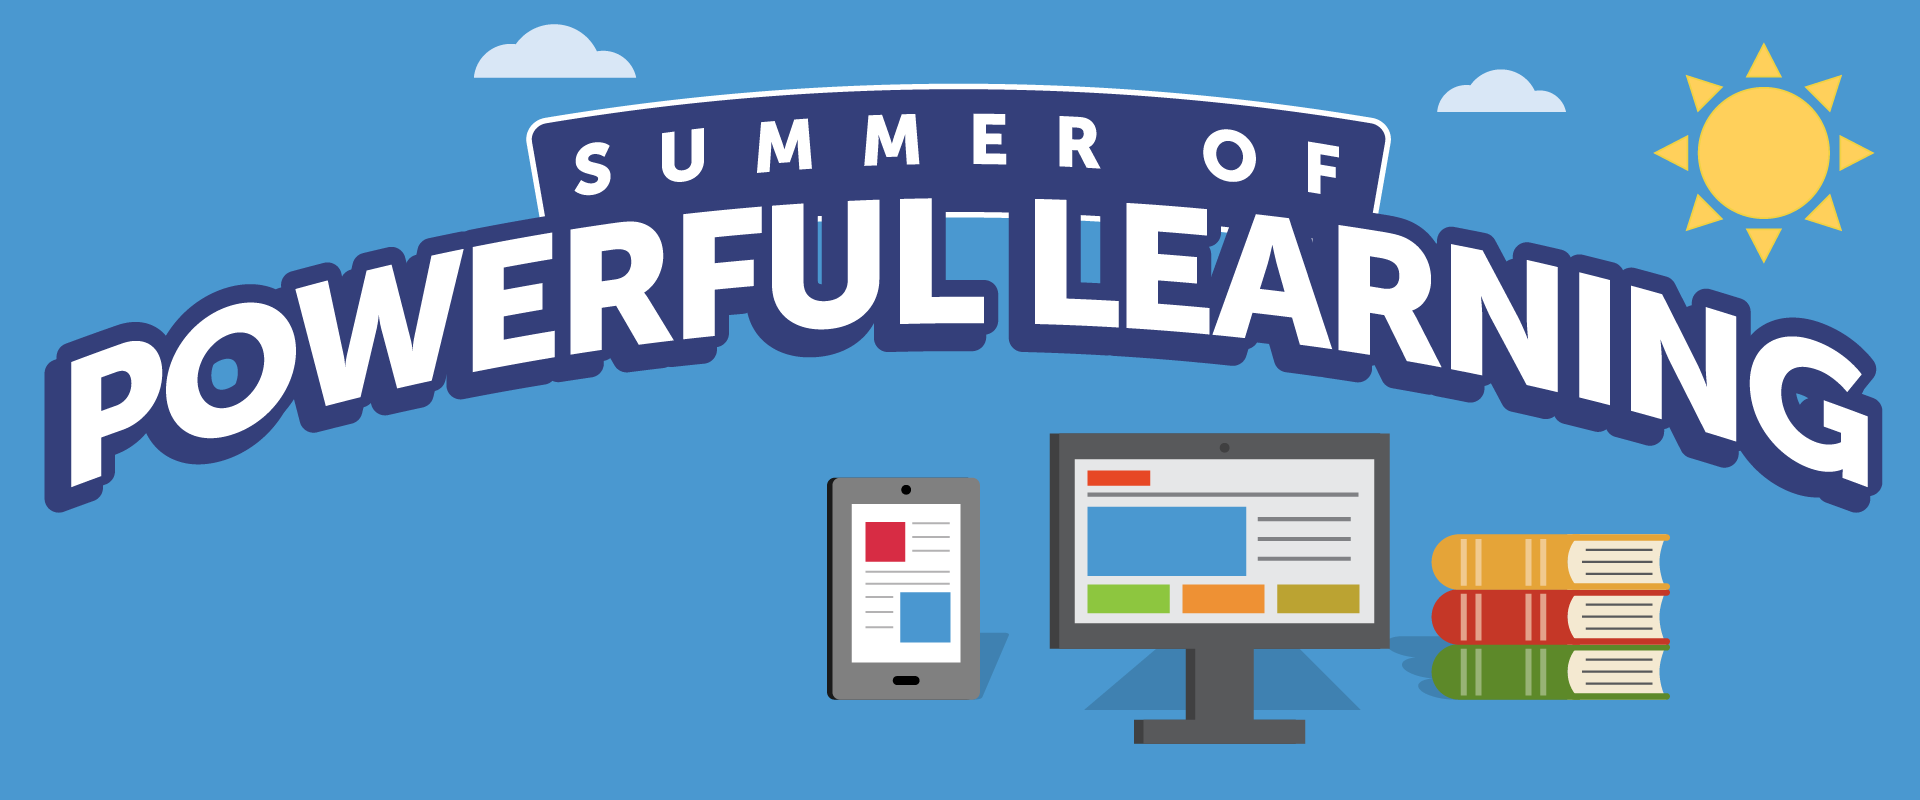 Summer of Powerful Learning